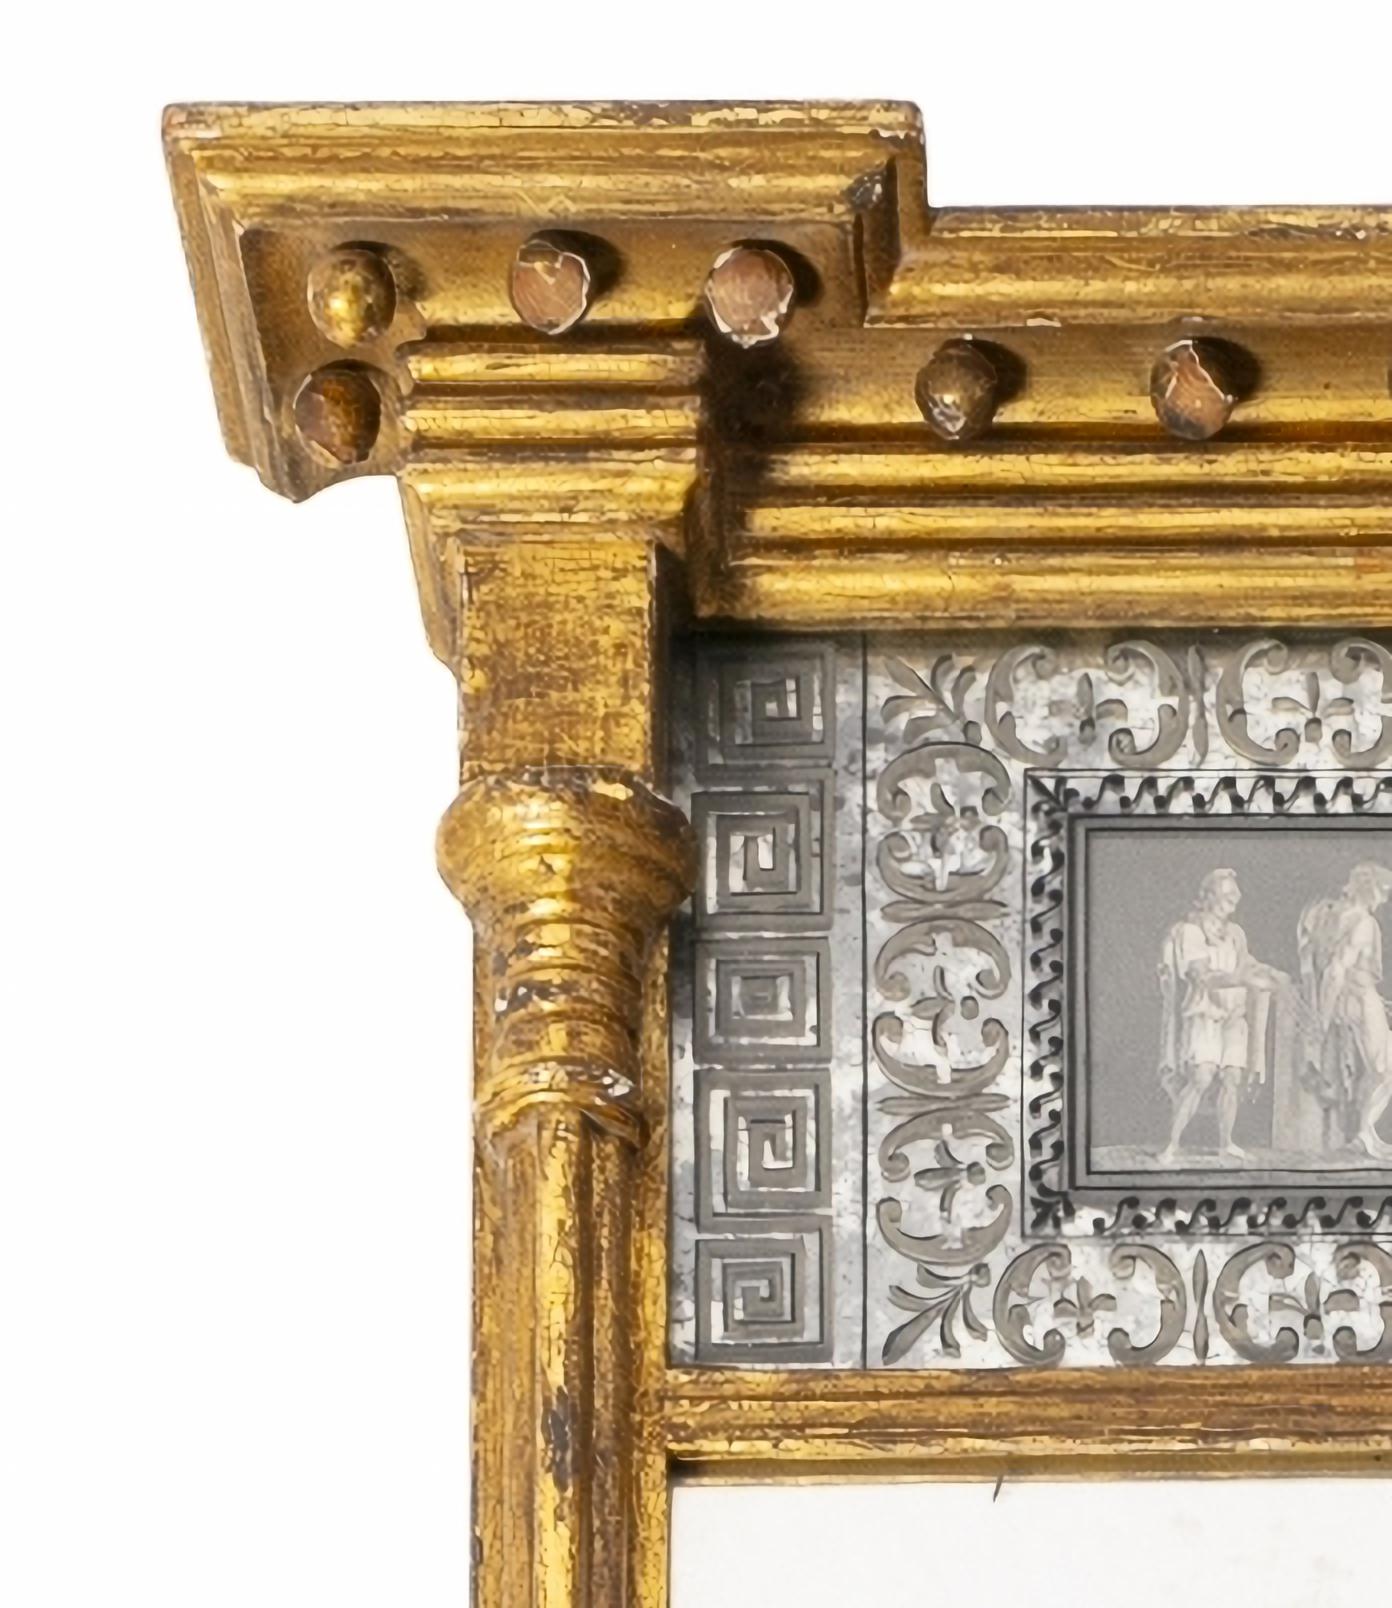 BEAUTIFUL VENETIAN WALL MIRROR 19th Century

Carved and gilded wood structure, 19th Century
Dim.: 80 x 40 cm
good condition